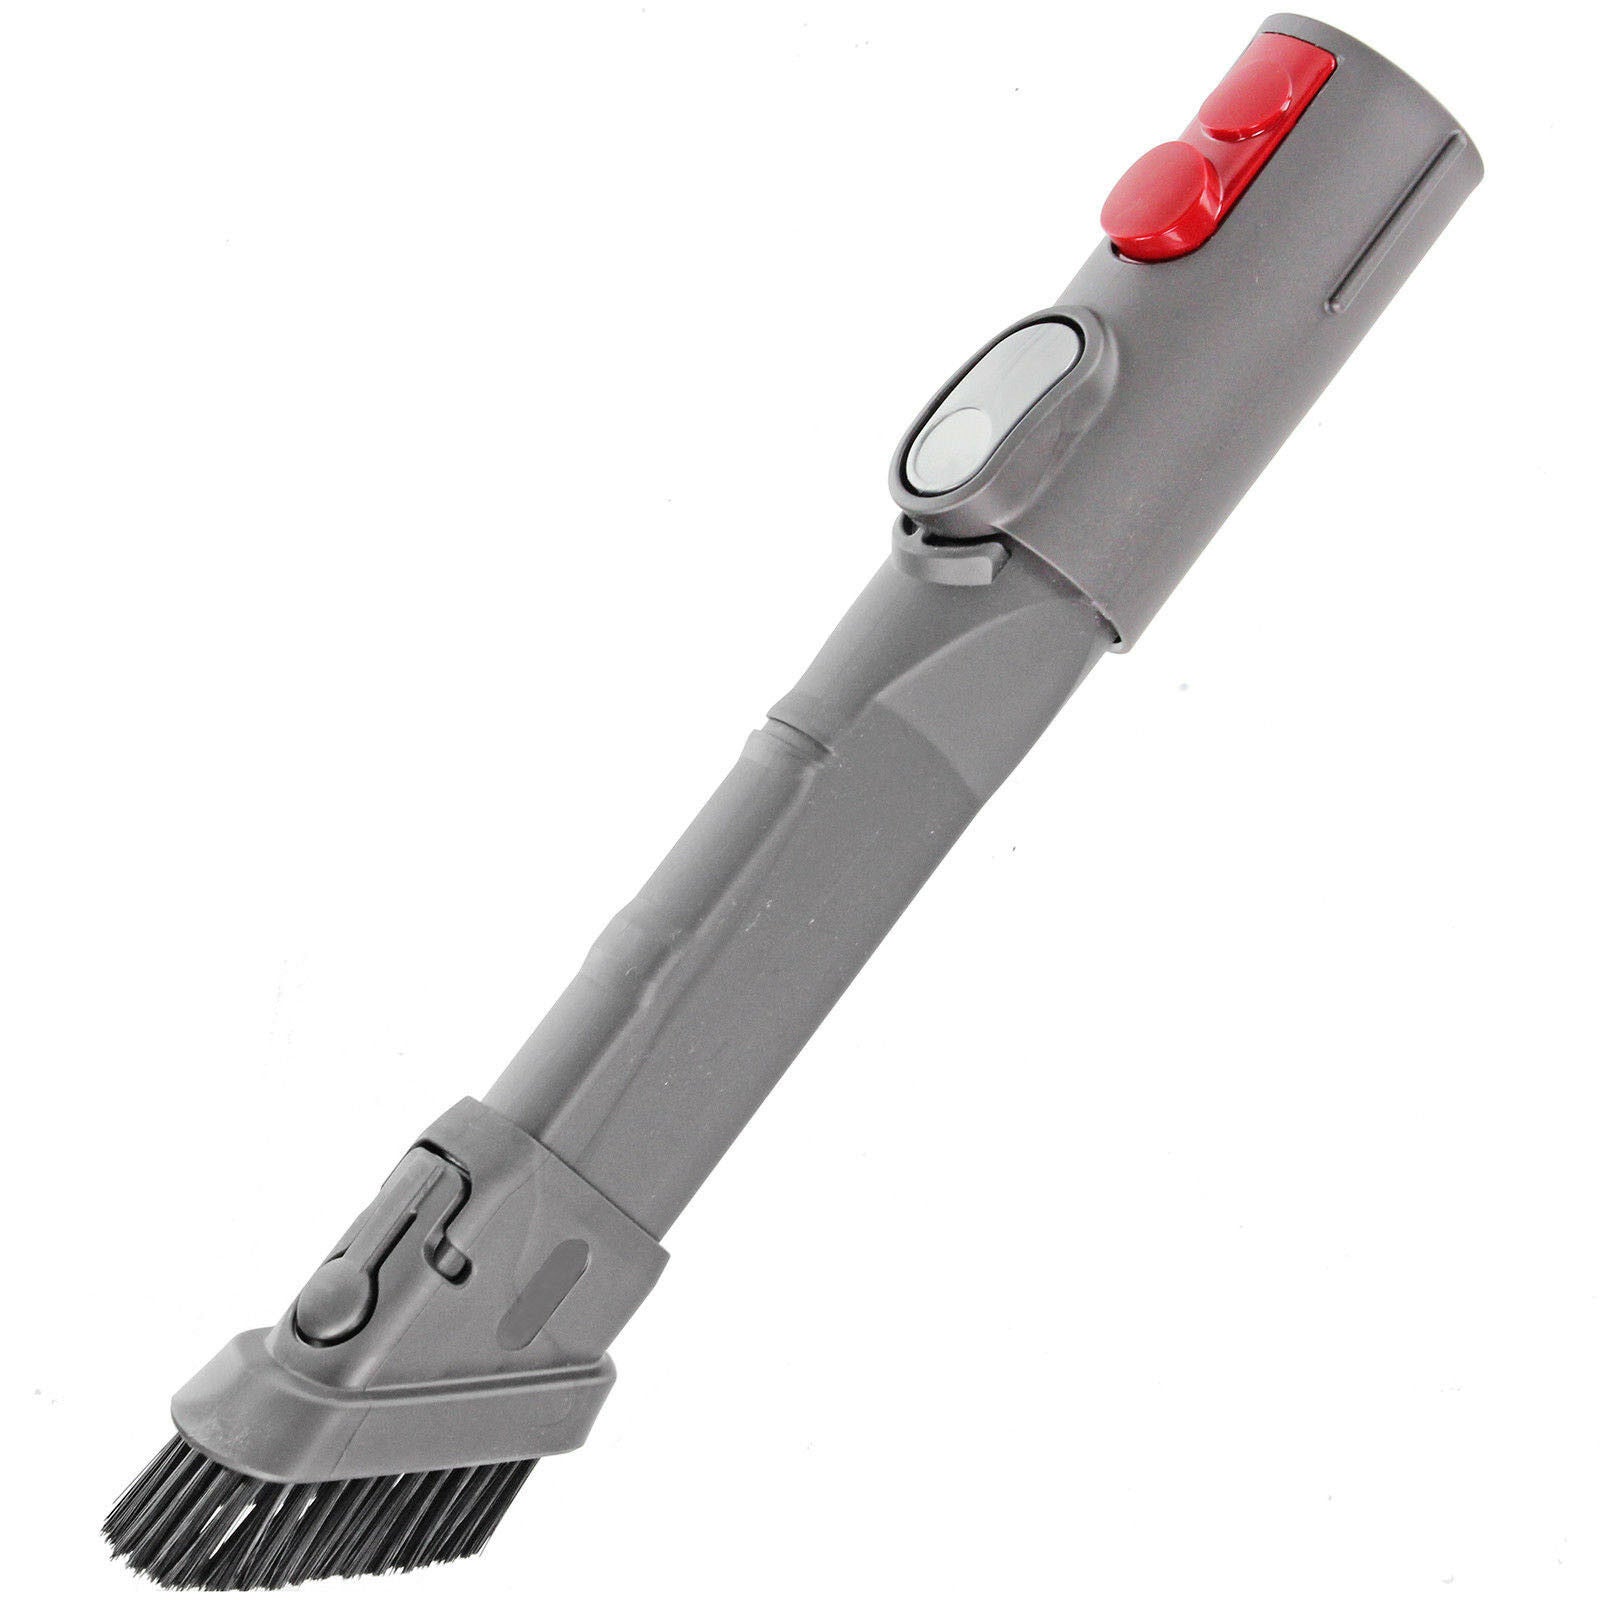 Slim Crevice / Brush 2in1 Tool compatible with DYSON Vacuum Cleaners